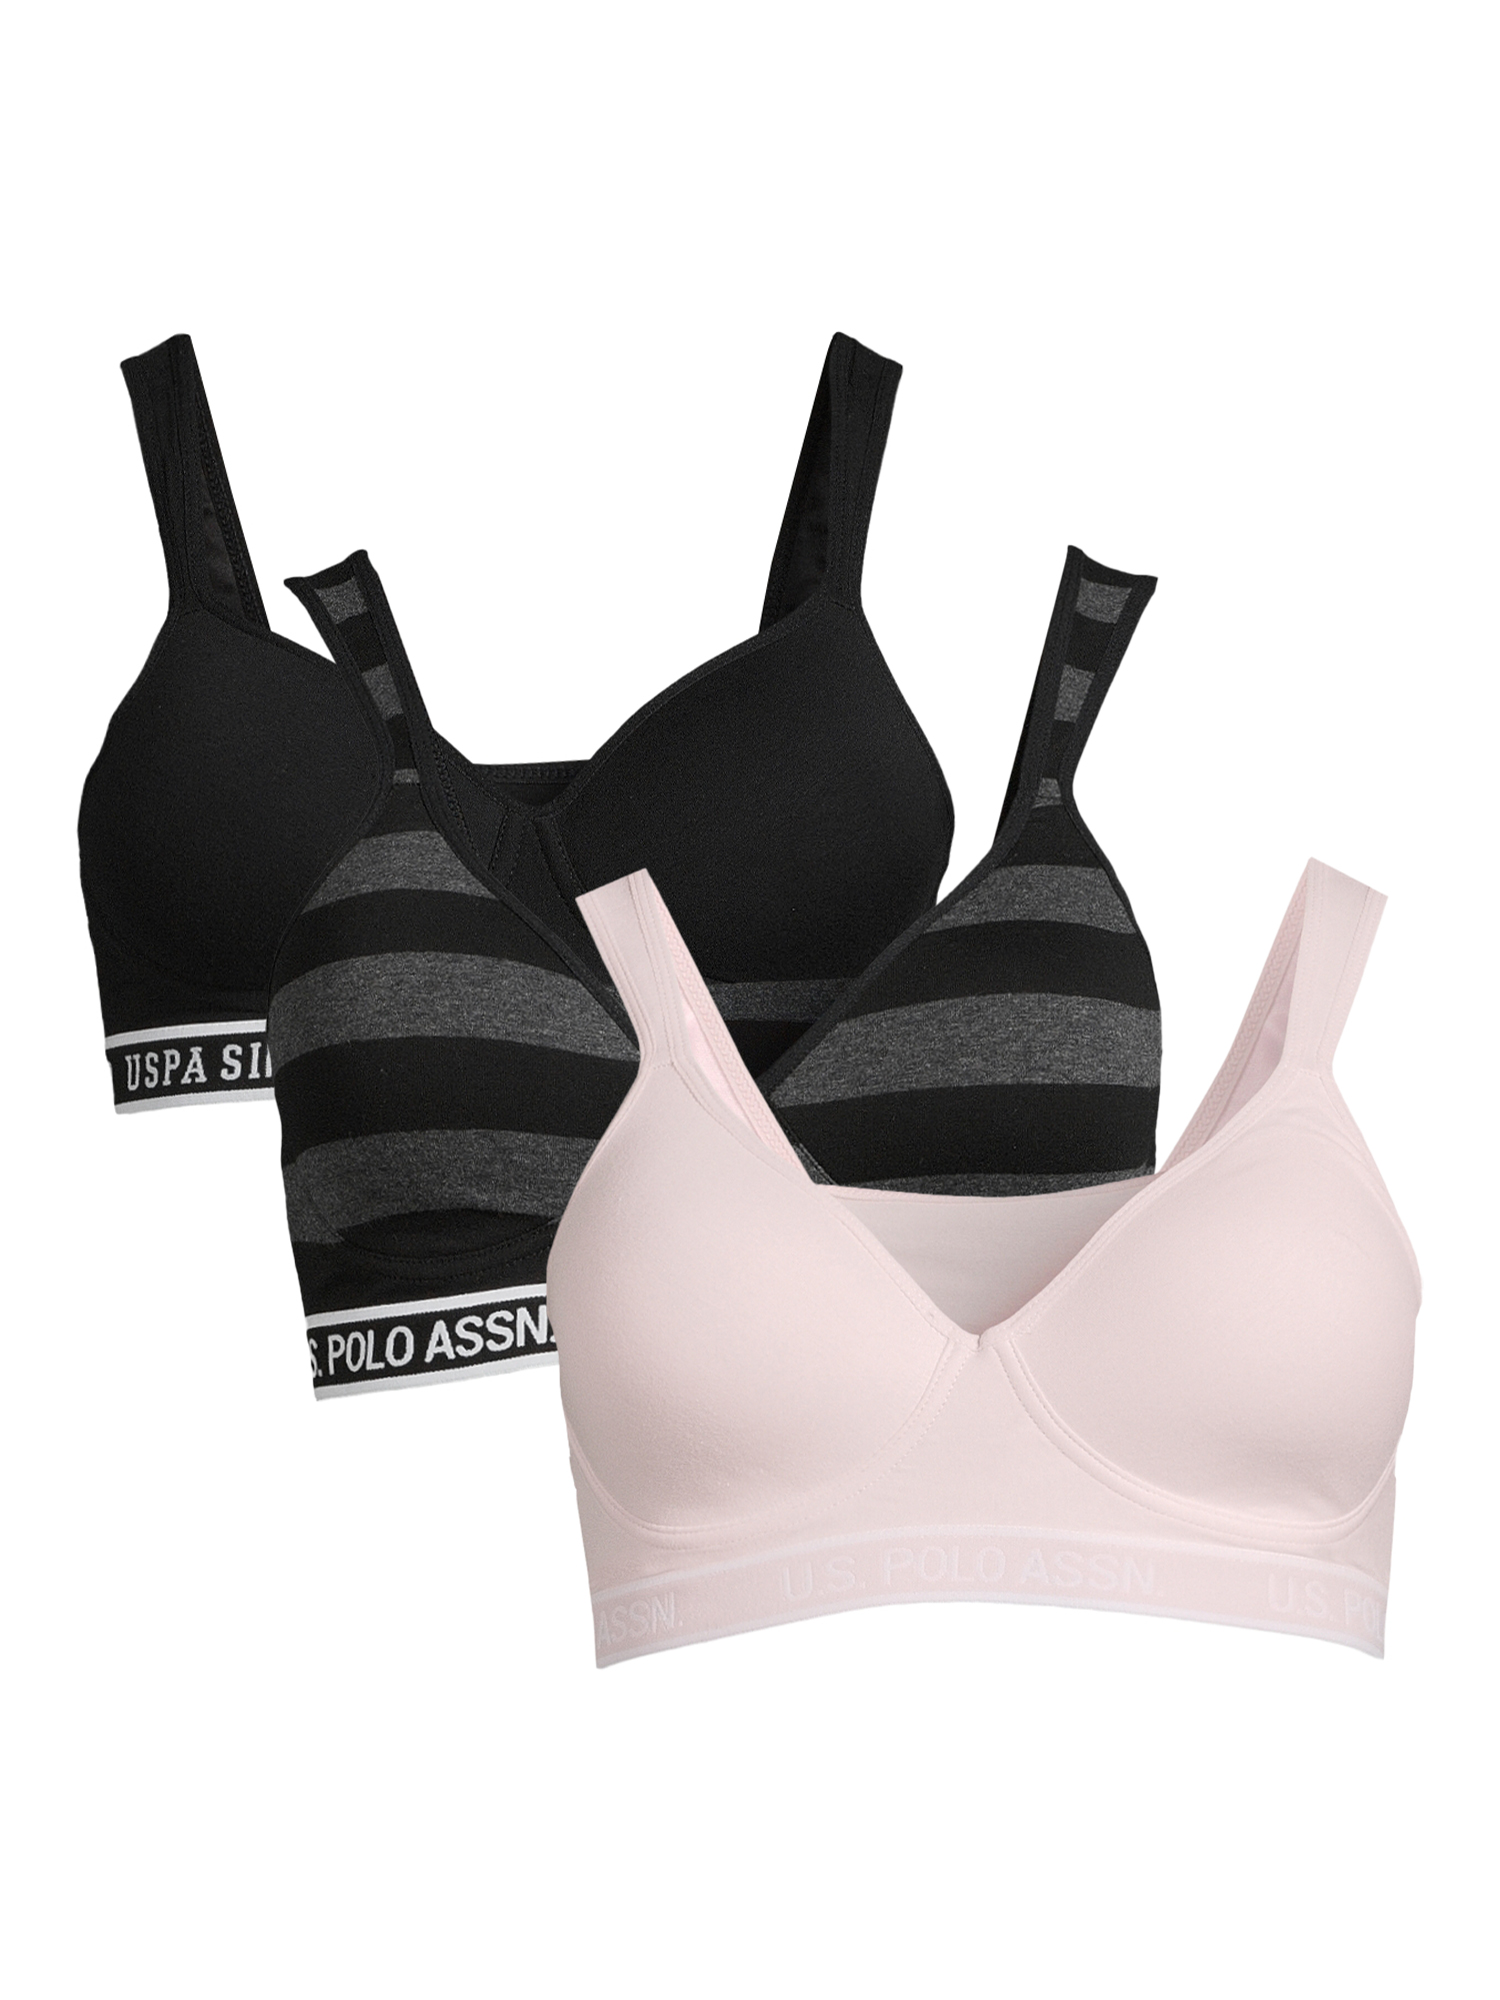 U.S. Polo Assn. Women's Tag-Free Striped Sports Bra Set, 3-Pack - image 1 of 4